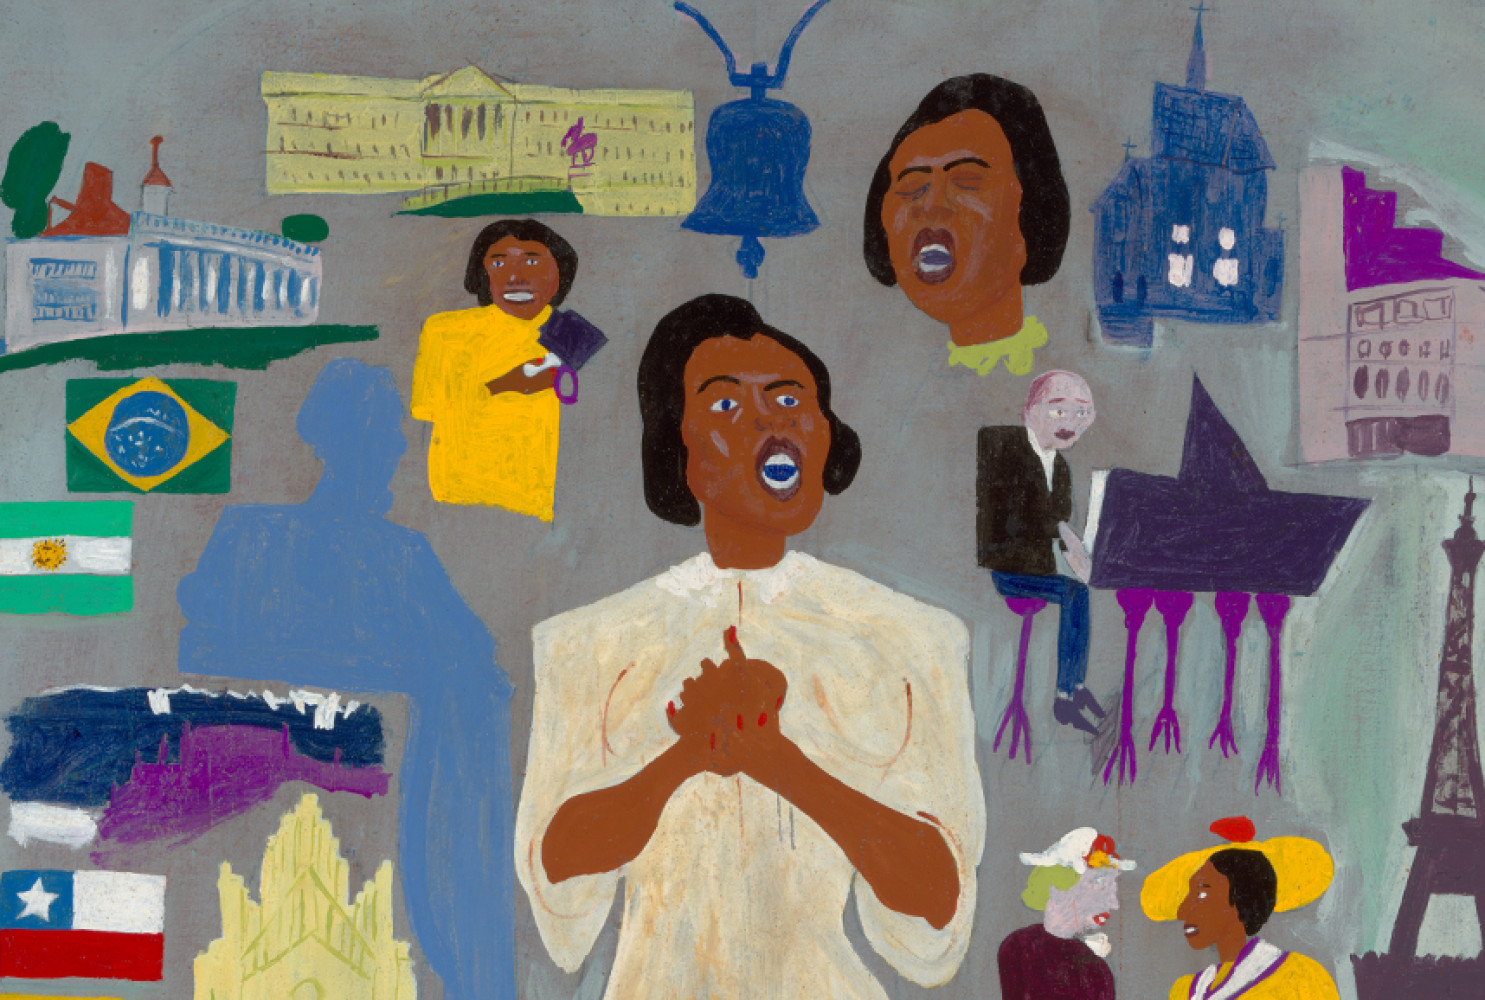 Marian Anderson (detail), ca. 1945, by William H. Johnson (American, 1901-1972). Oil on paperboard, 35 5/8 x 28 7/8 inches. Image courtesy of Smithsonian American Art Museum.